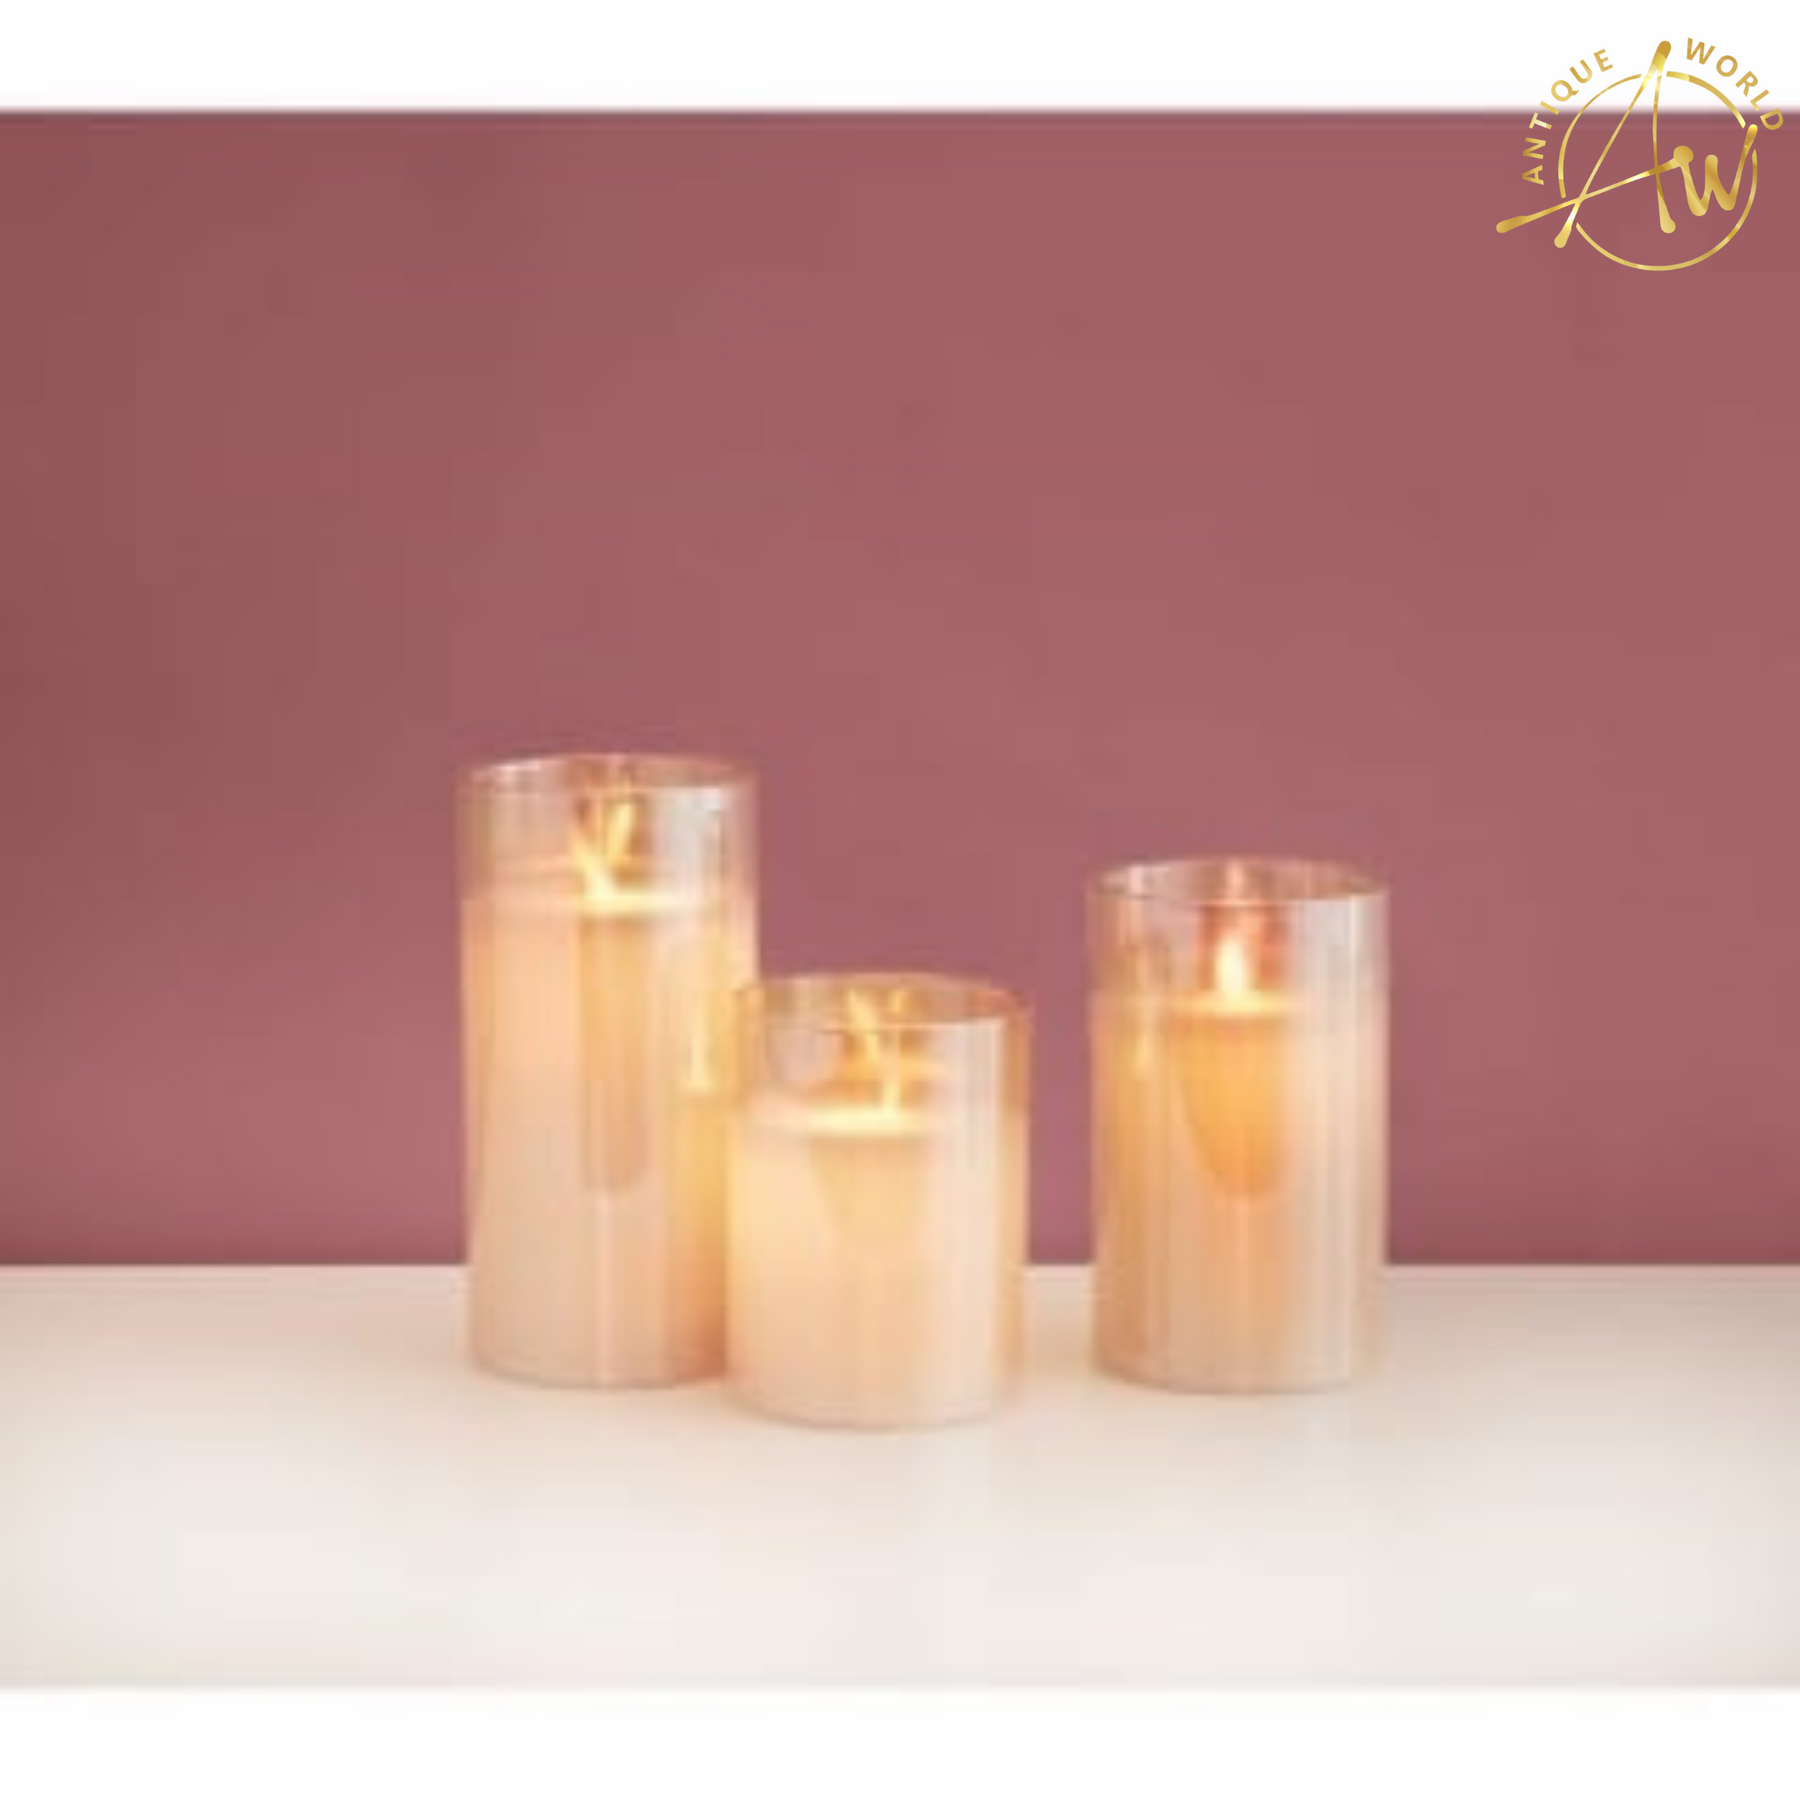 Simile Gold Glass Flameless Candles Flickering ( Set of 3 )